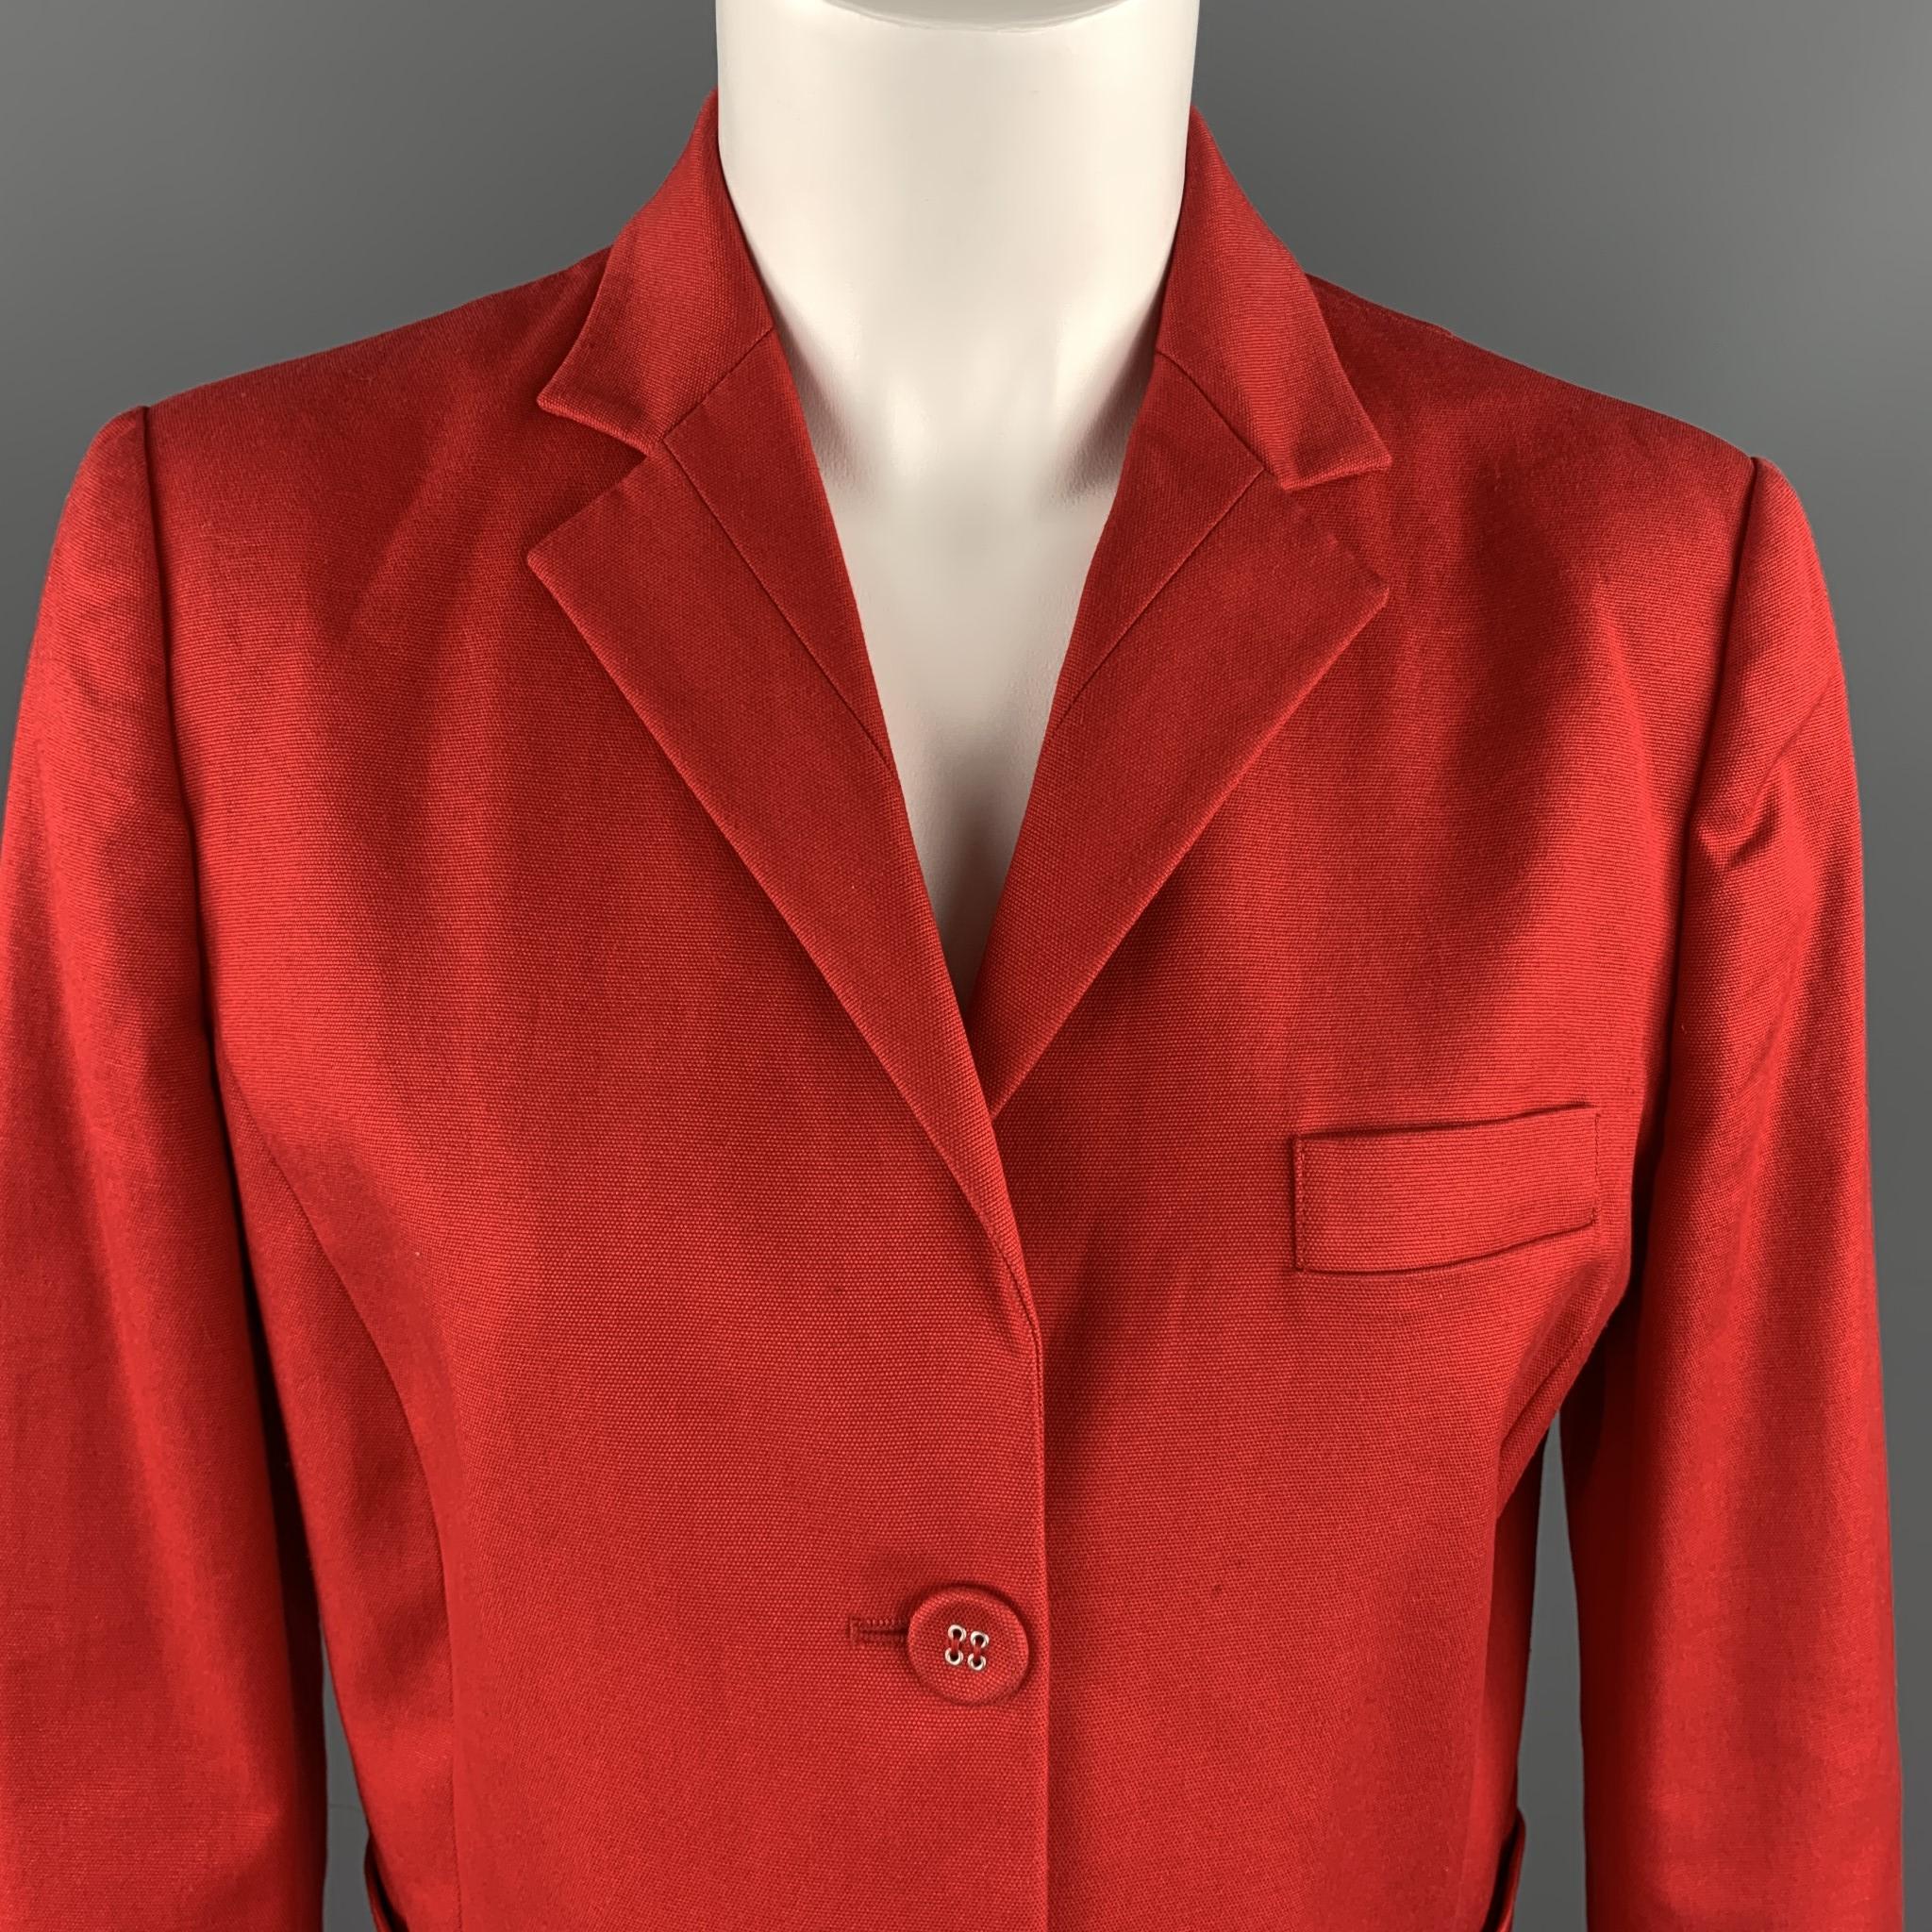 VALENTINO RED cropped blazer comes in bold red textured stretch cotton with a notch lapel and two button front. Made in Italy.

Very Good Pre-Owned Condition.
Marked: USA 8

Measurements:

Shoulder: 16 in.
Bust: 40 in.
Sleeve: 25 in.
Length: 21